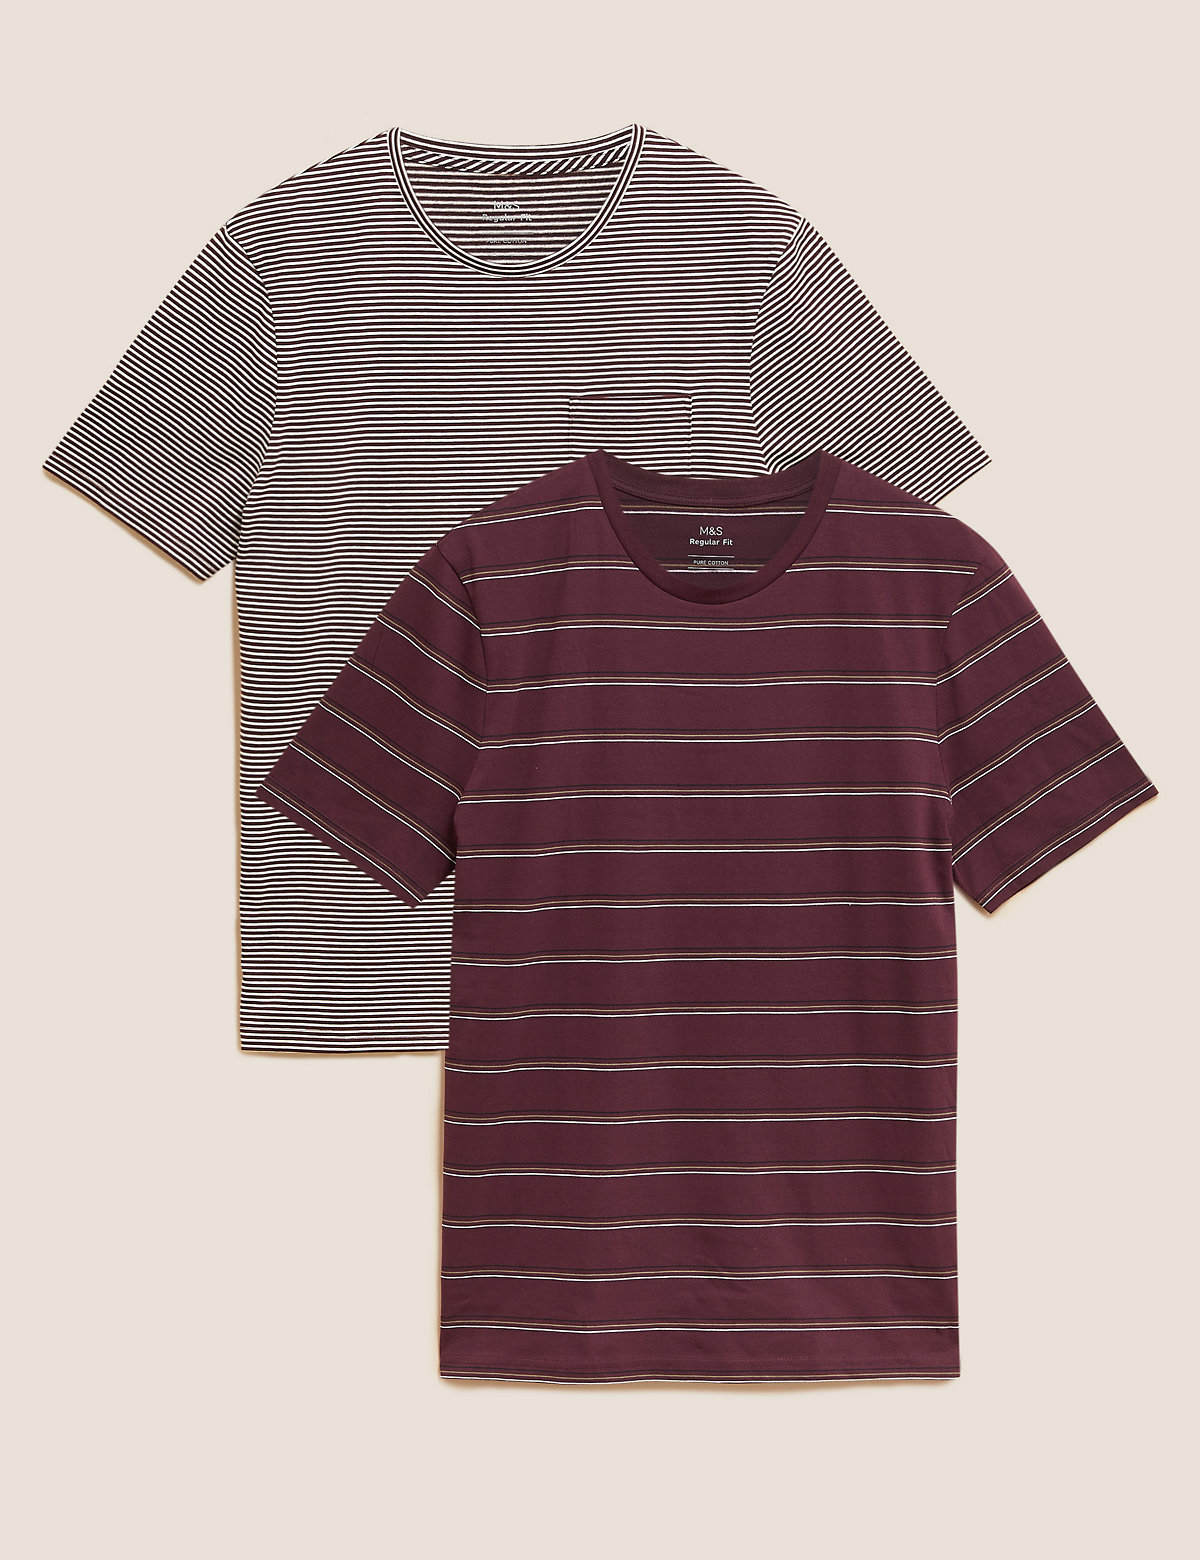 2 Pack Pure Cotton Striped T-Shirts